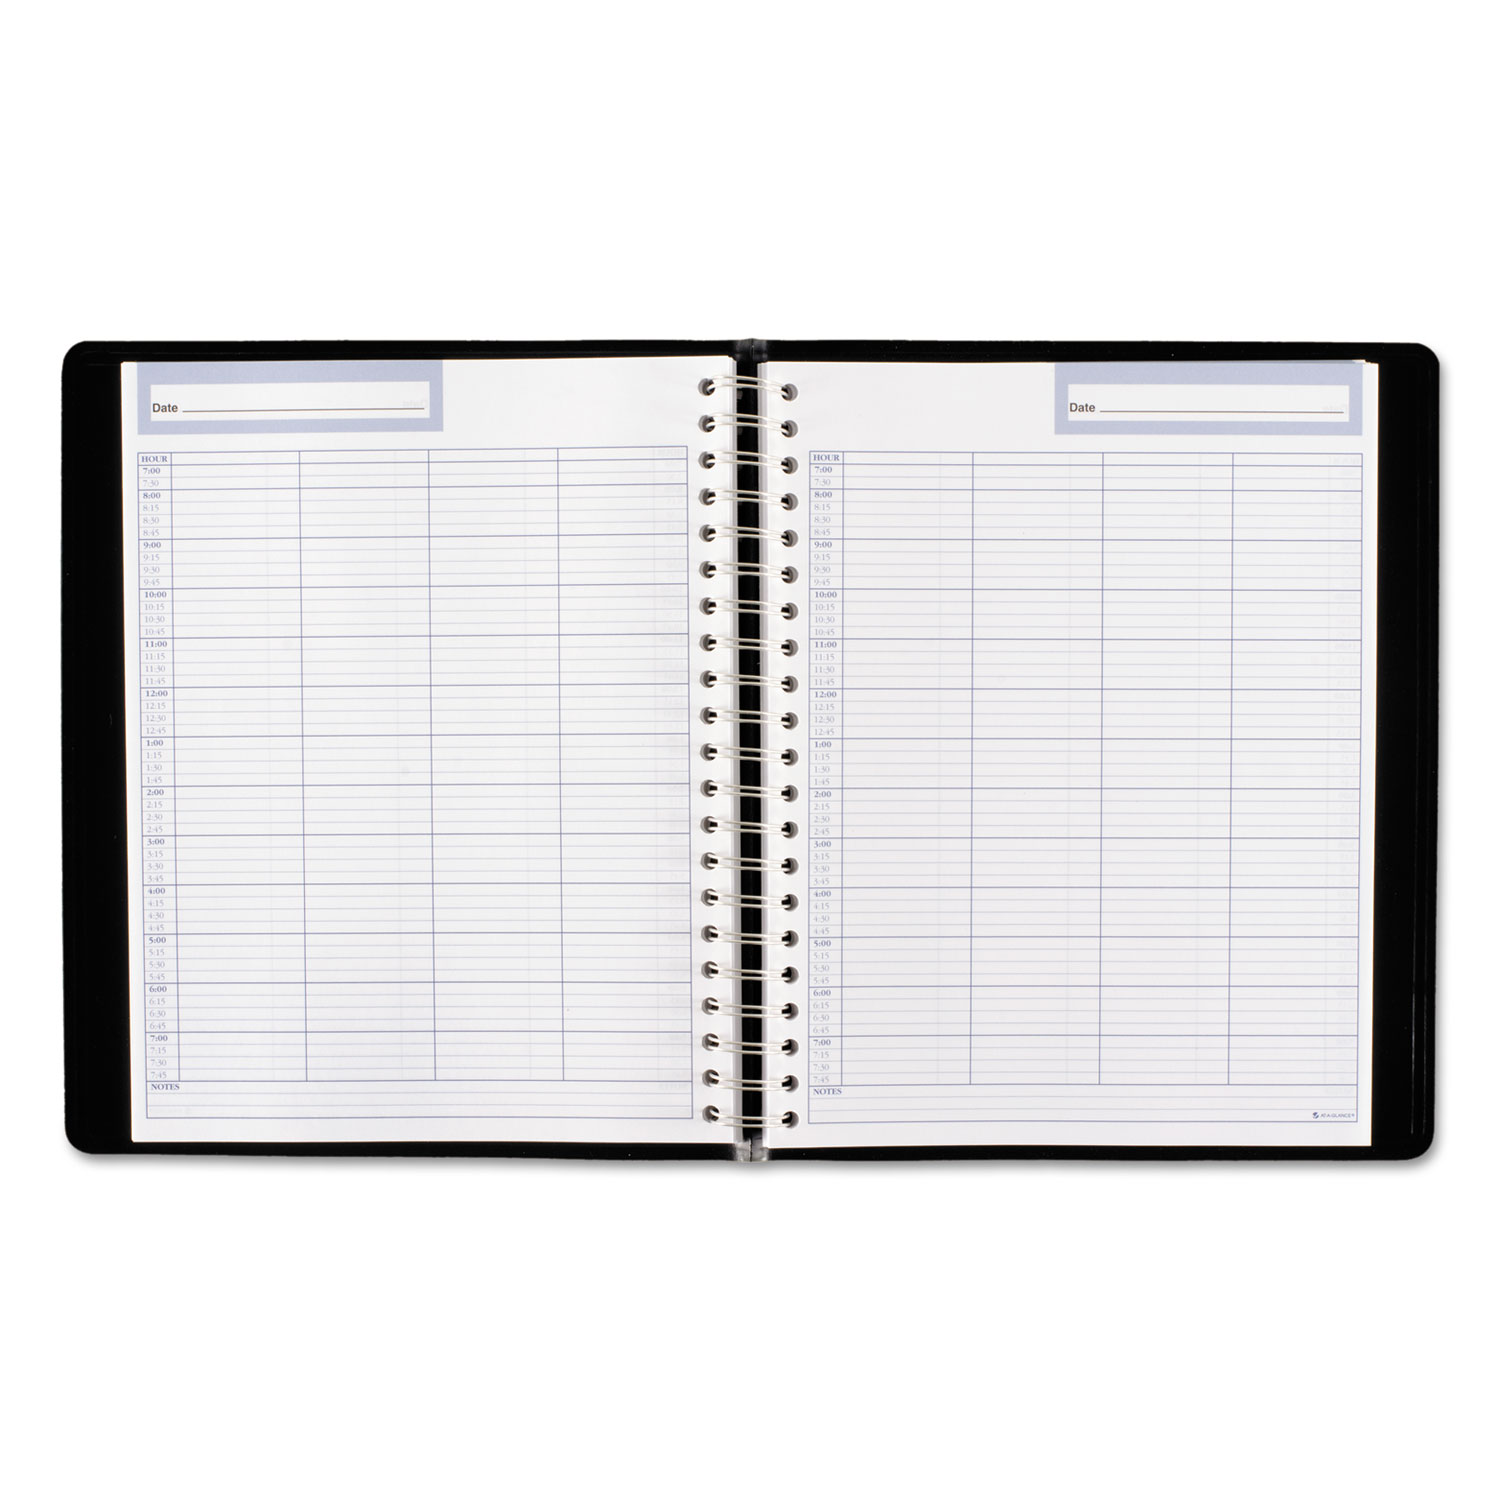  AT-A-GLANCE G57000 Undated Four-Person Group Daily Appointment Book, 10 3/4 x 8 1/2, Black (AAGG57000) 